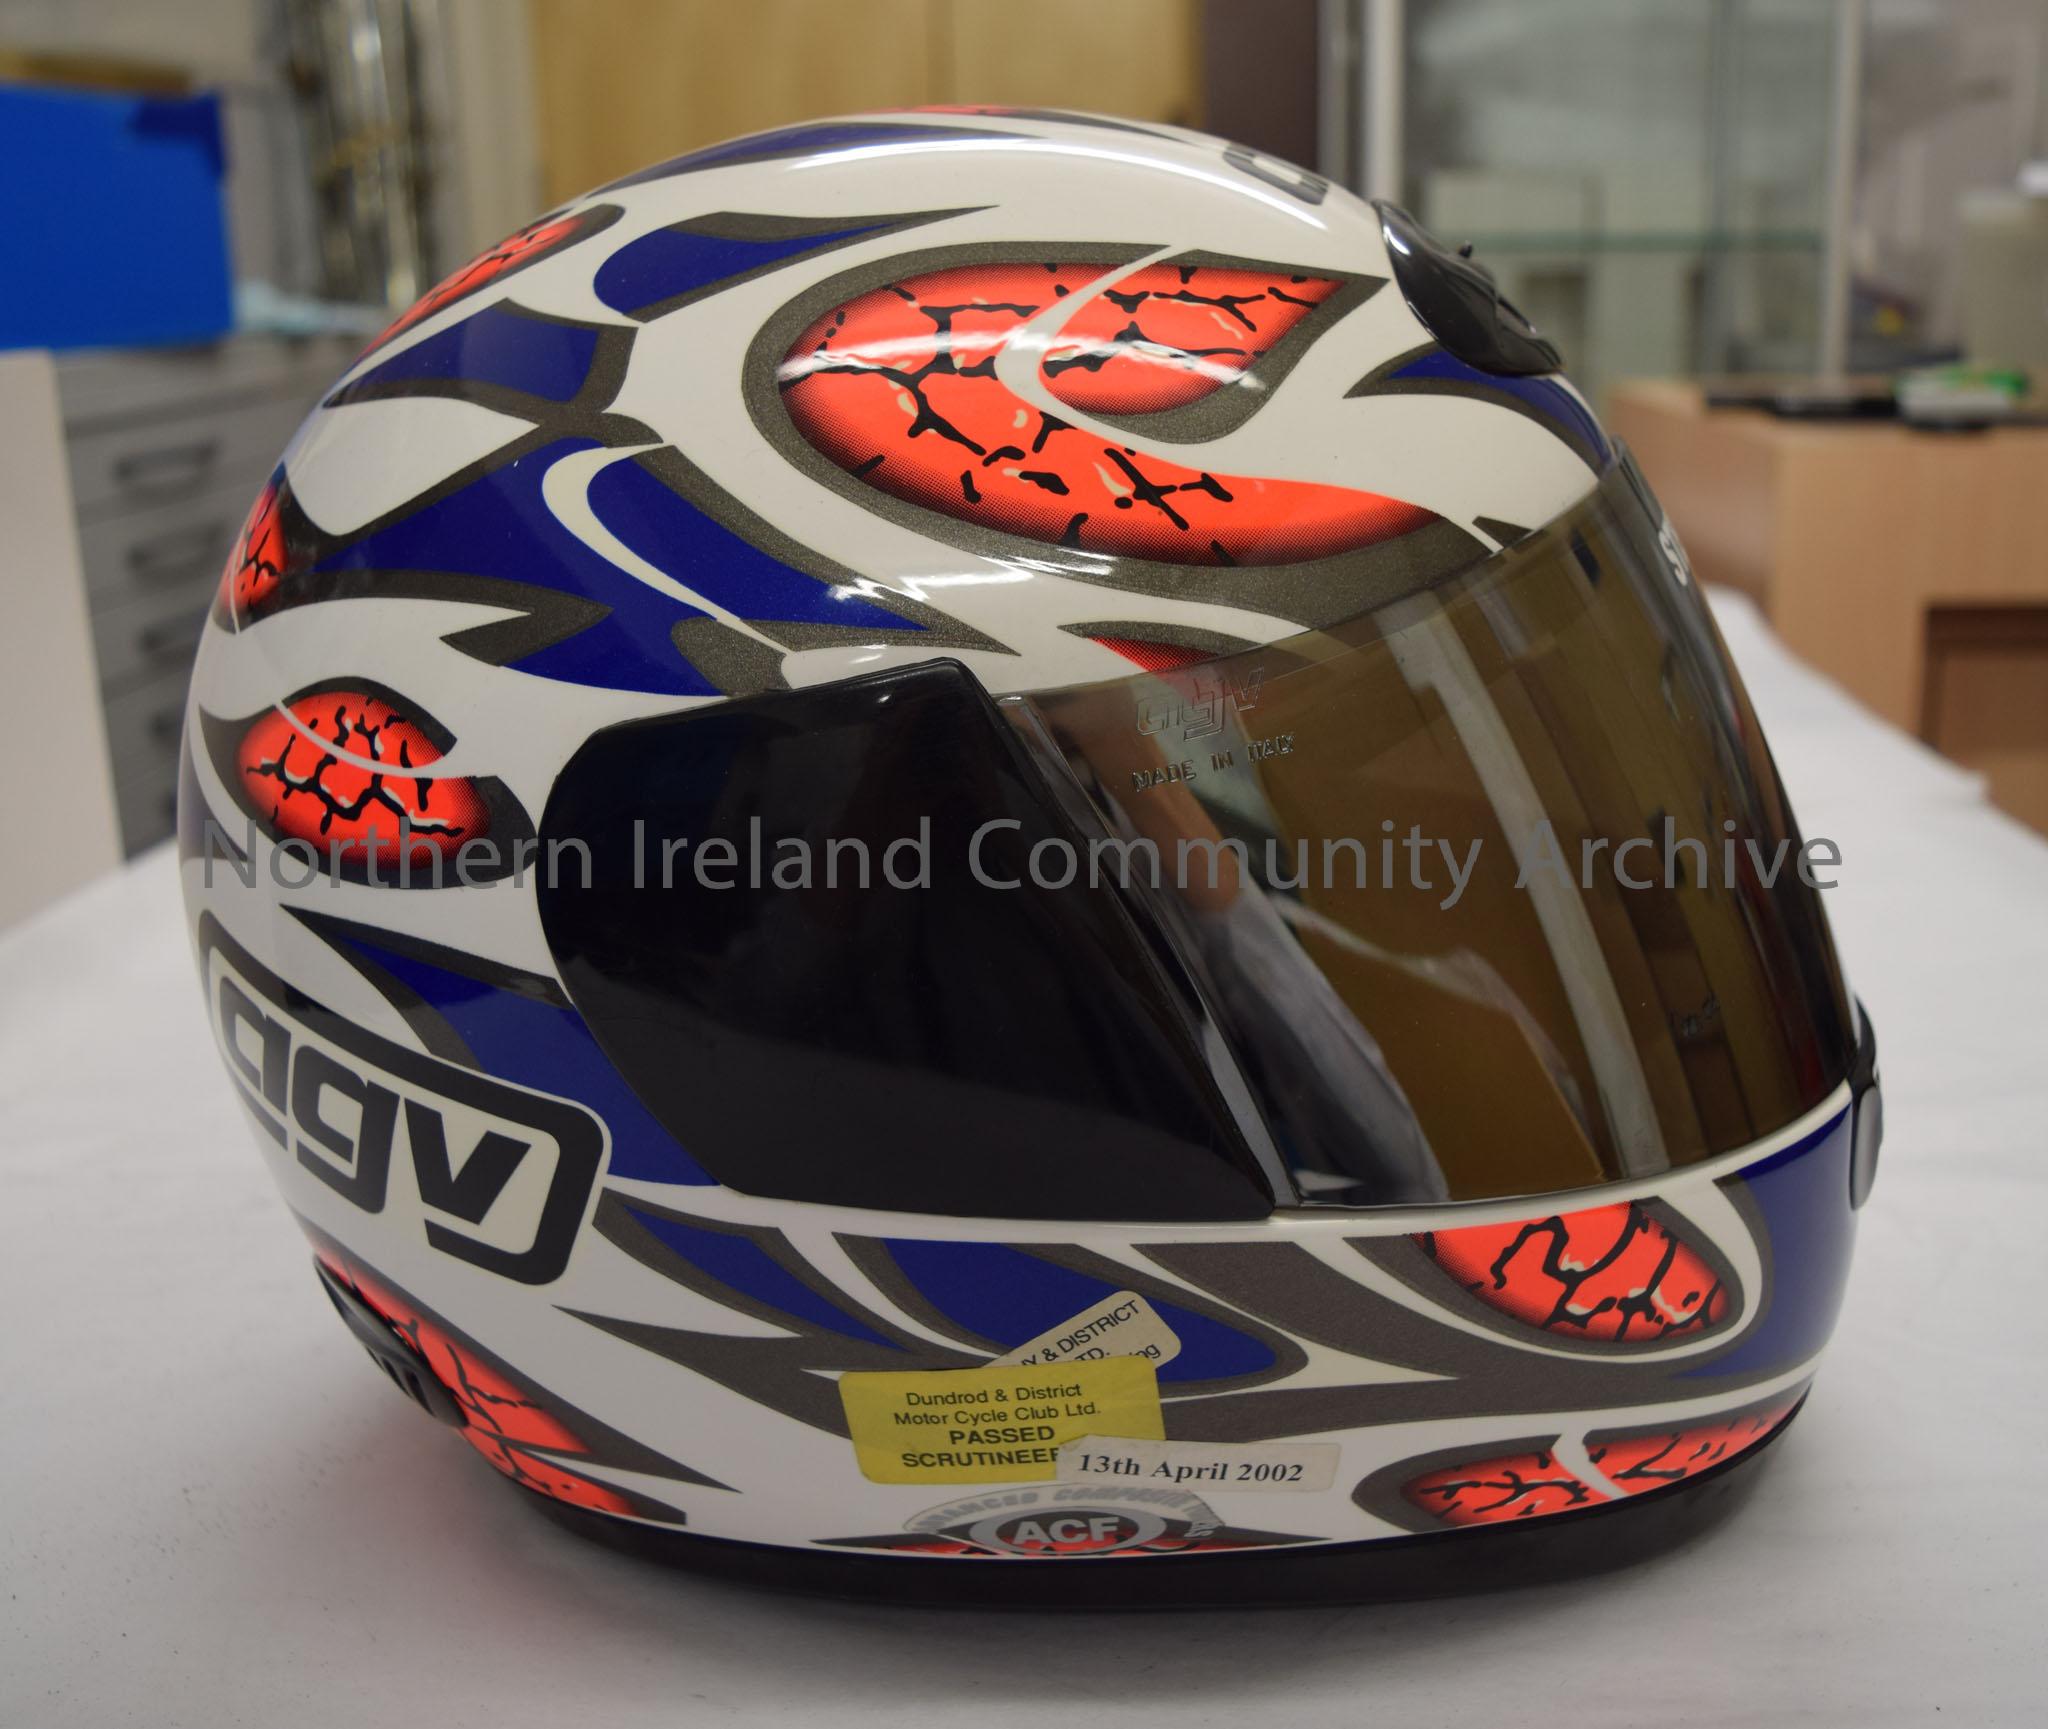 AGV motorcycle helmet belonging to Steve Ball. White helmet with blue and grey pattern and sections in bright orange designed to look a bit like a bra… – 2016.66 (5)